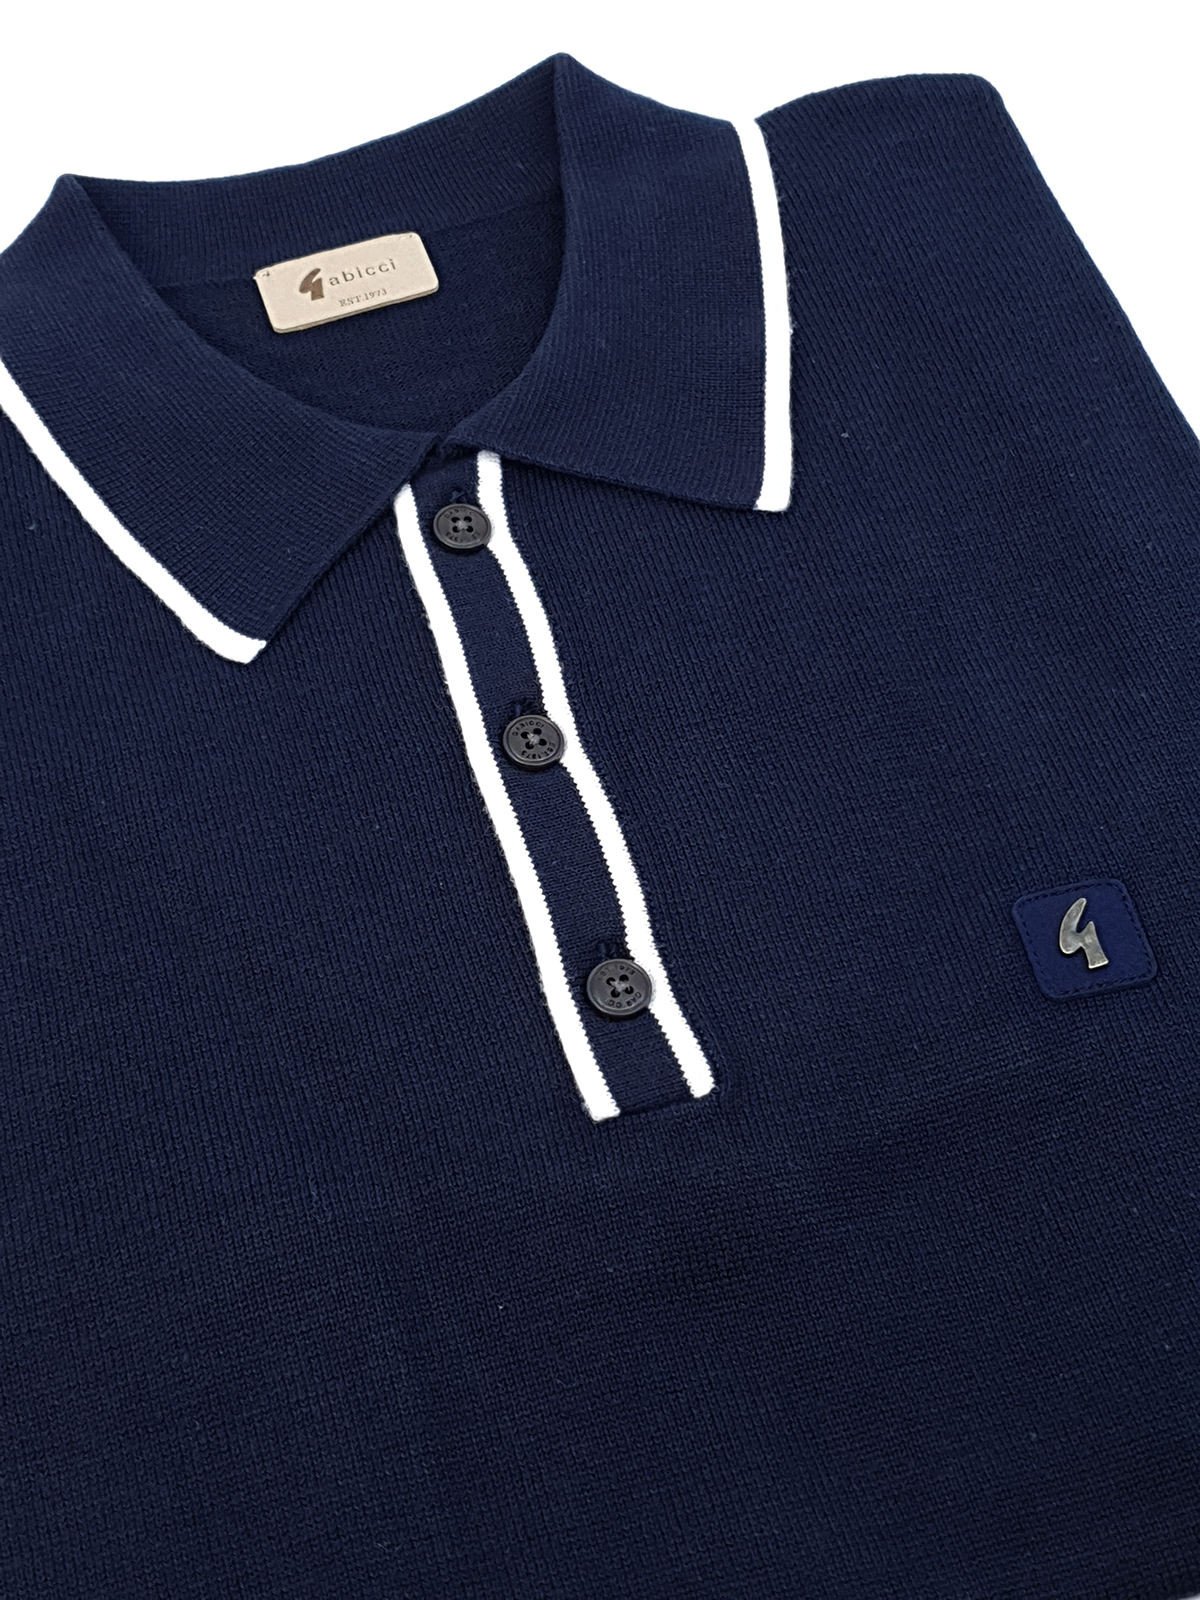 Gabicci Short Sleeve Polo In Navy White Tip – Mod Shoes